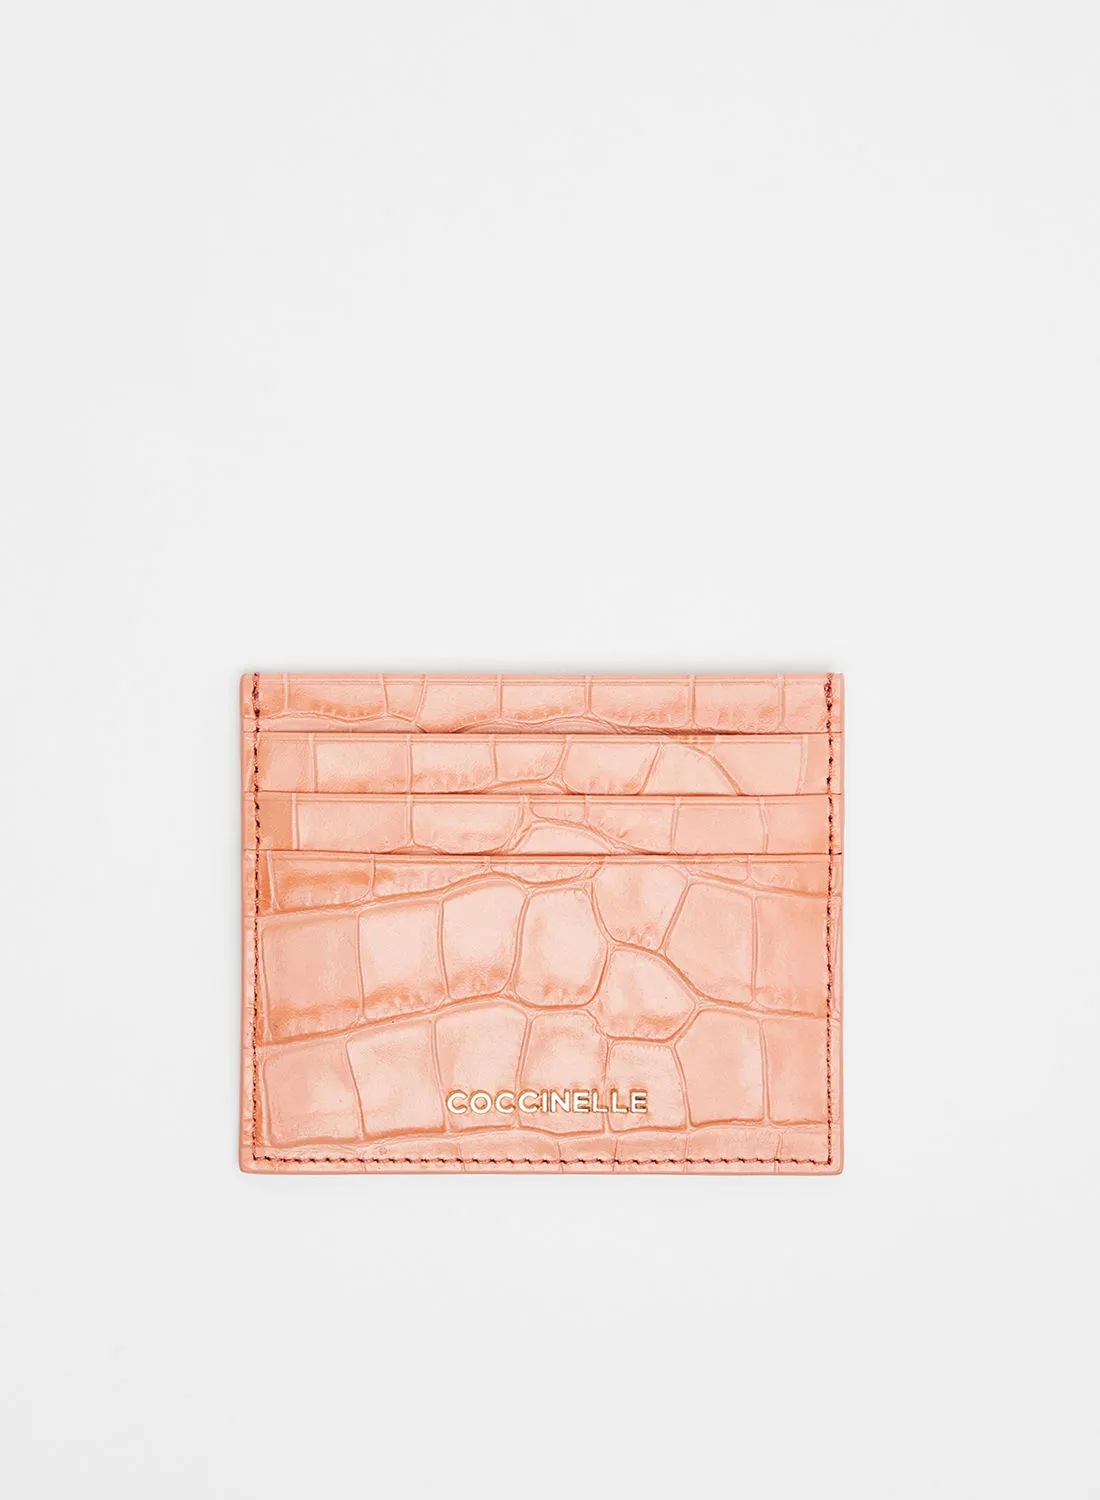 COCCINELLE Croc Effect Leather Card Holder